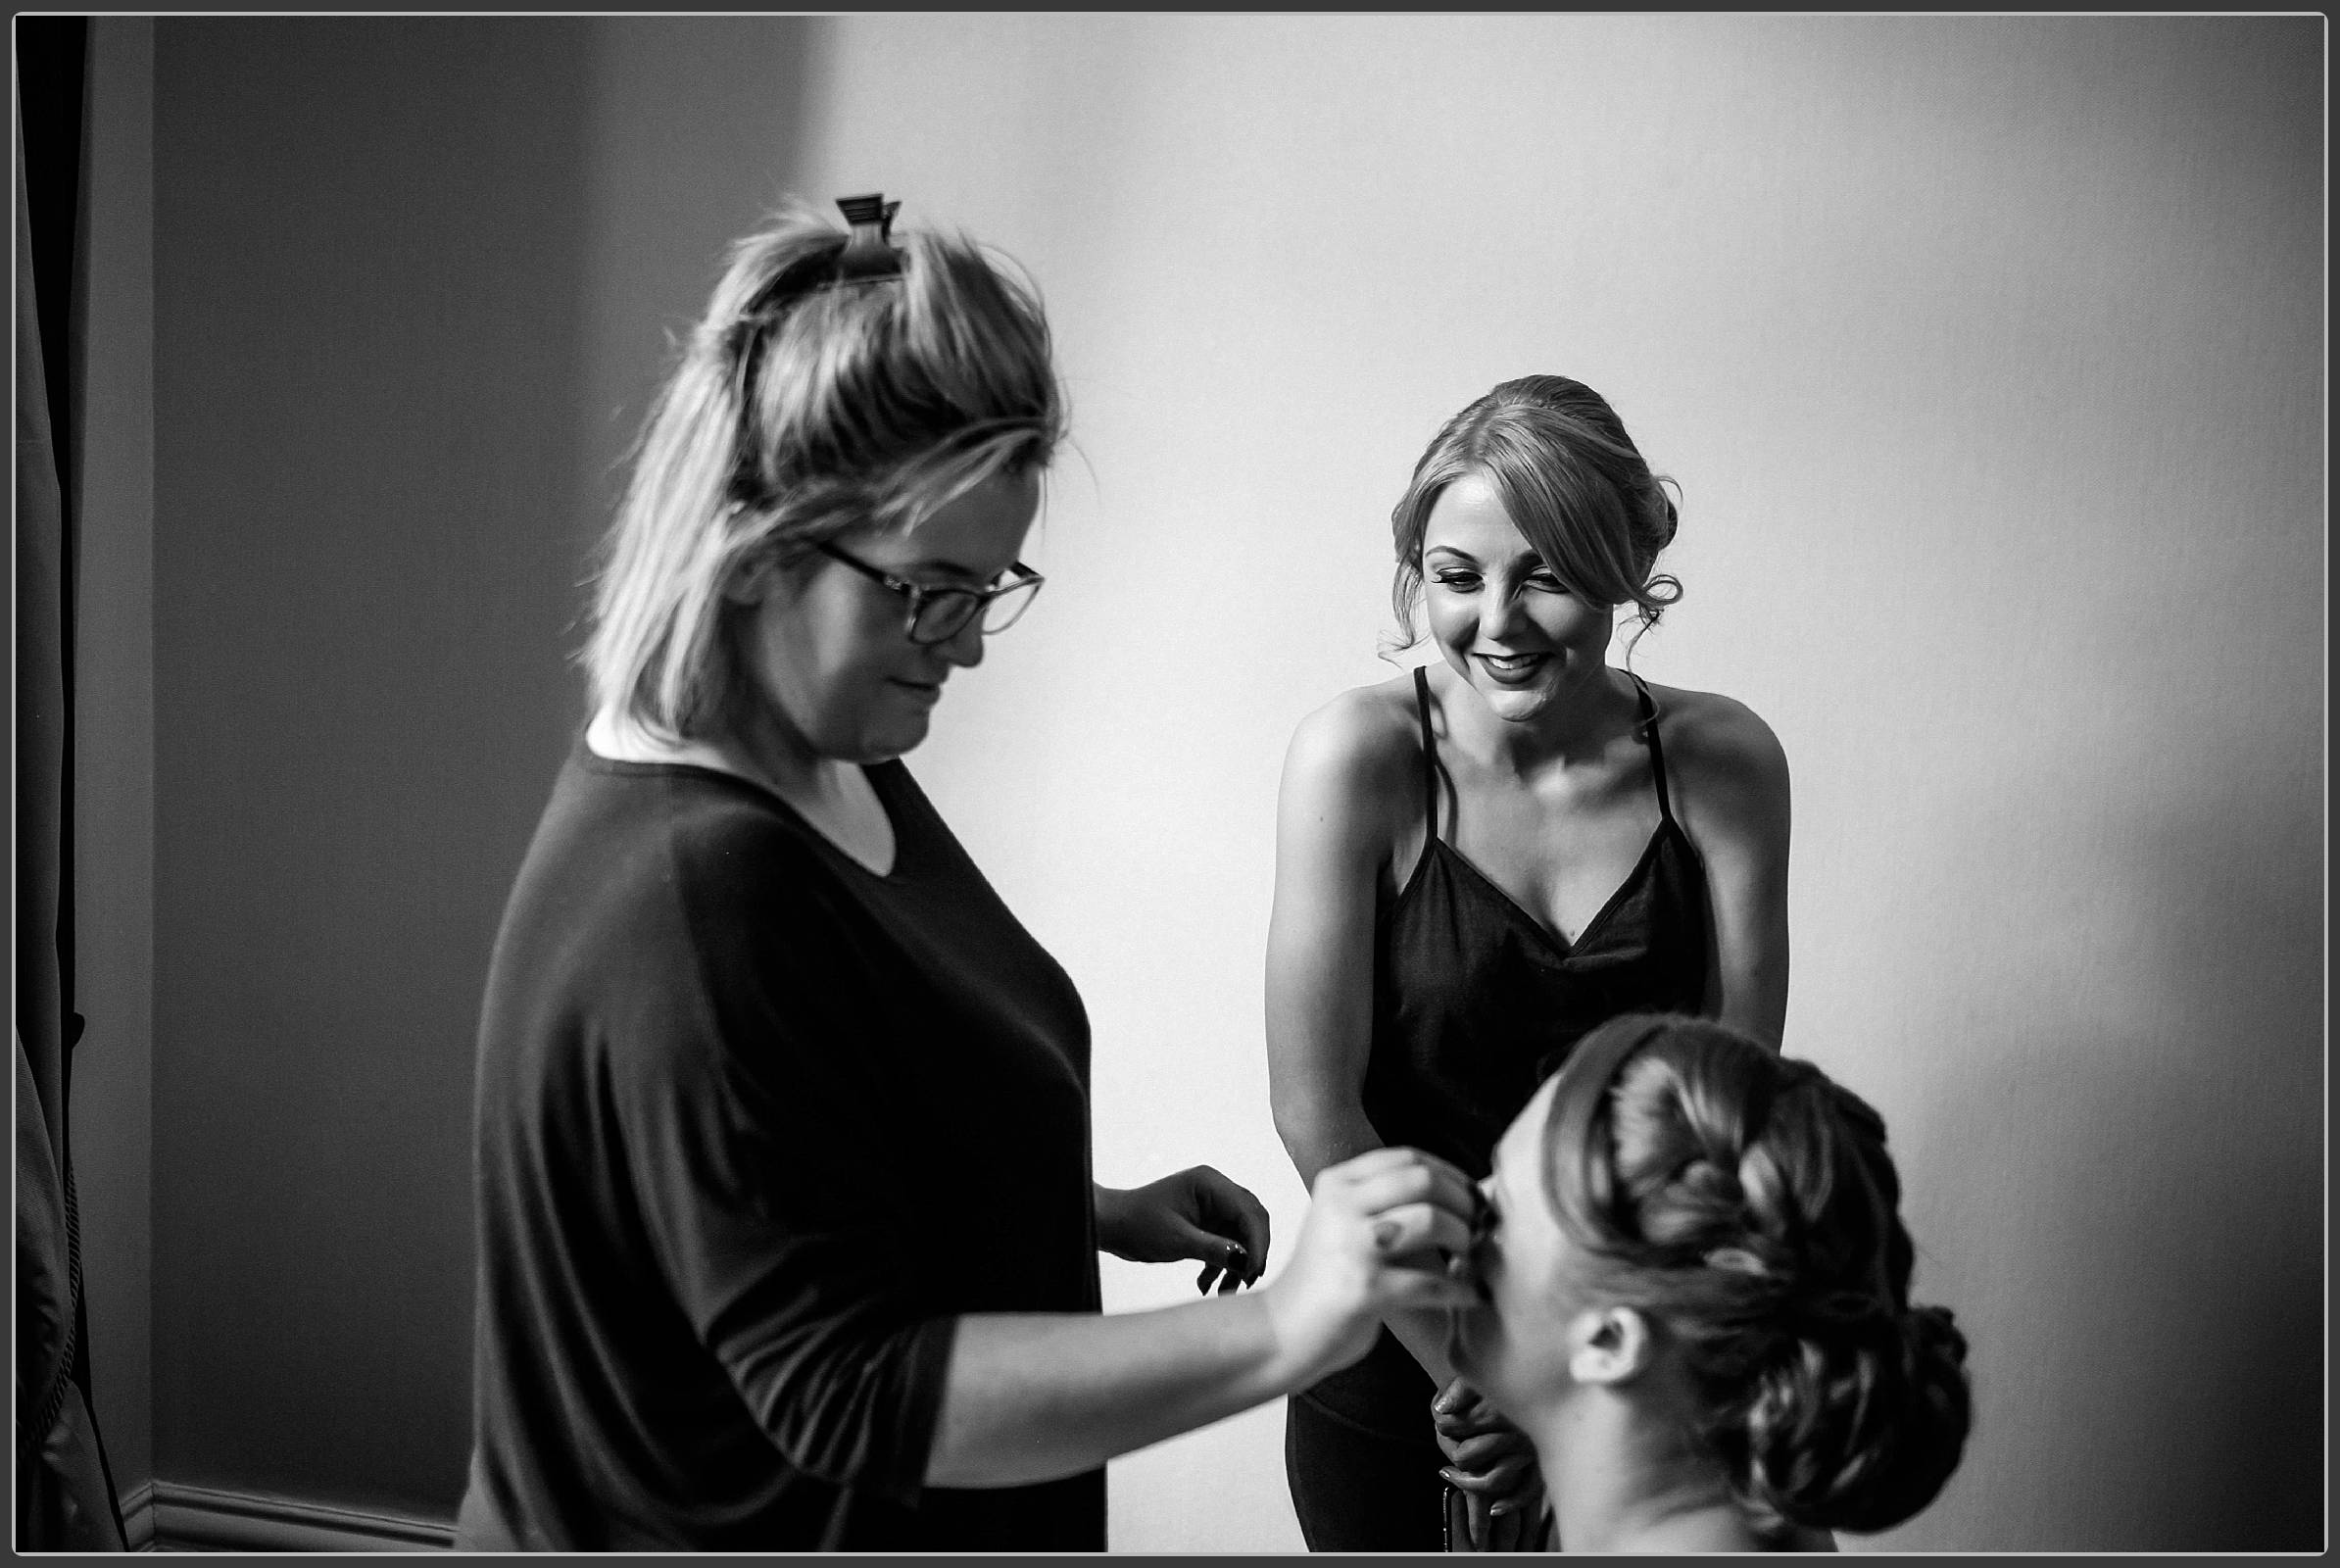 The bride having her makeup done 2